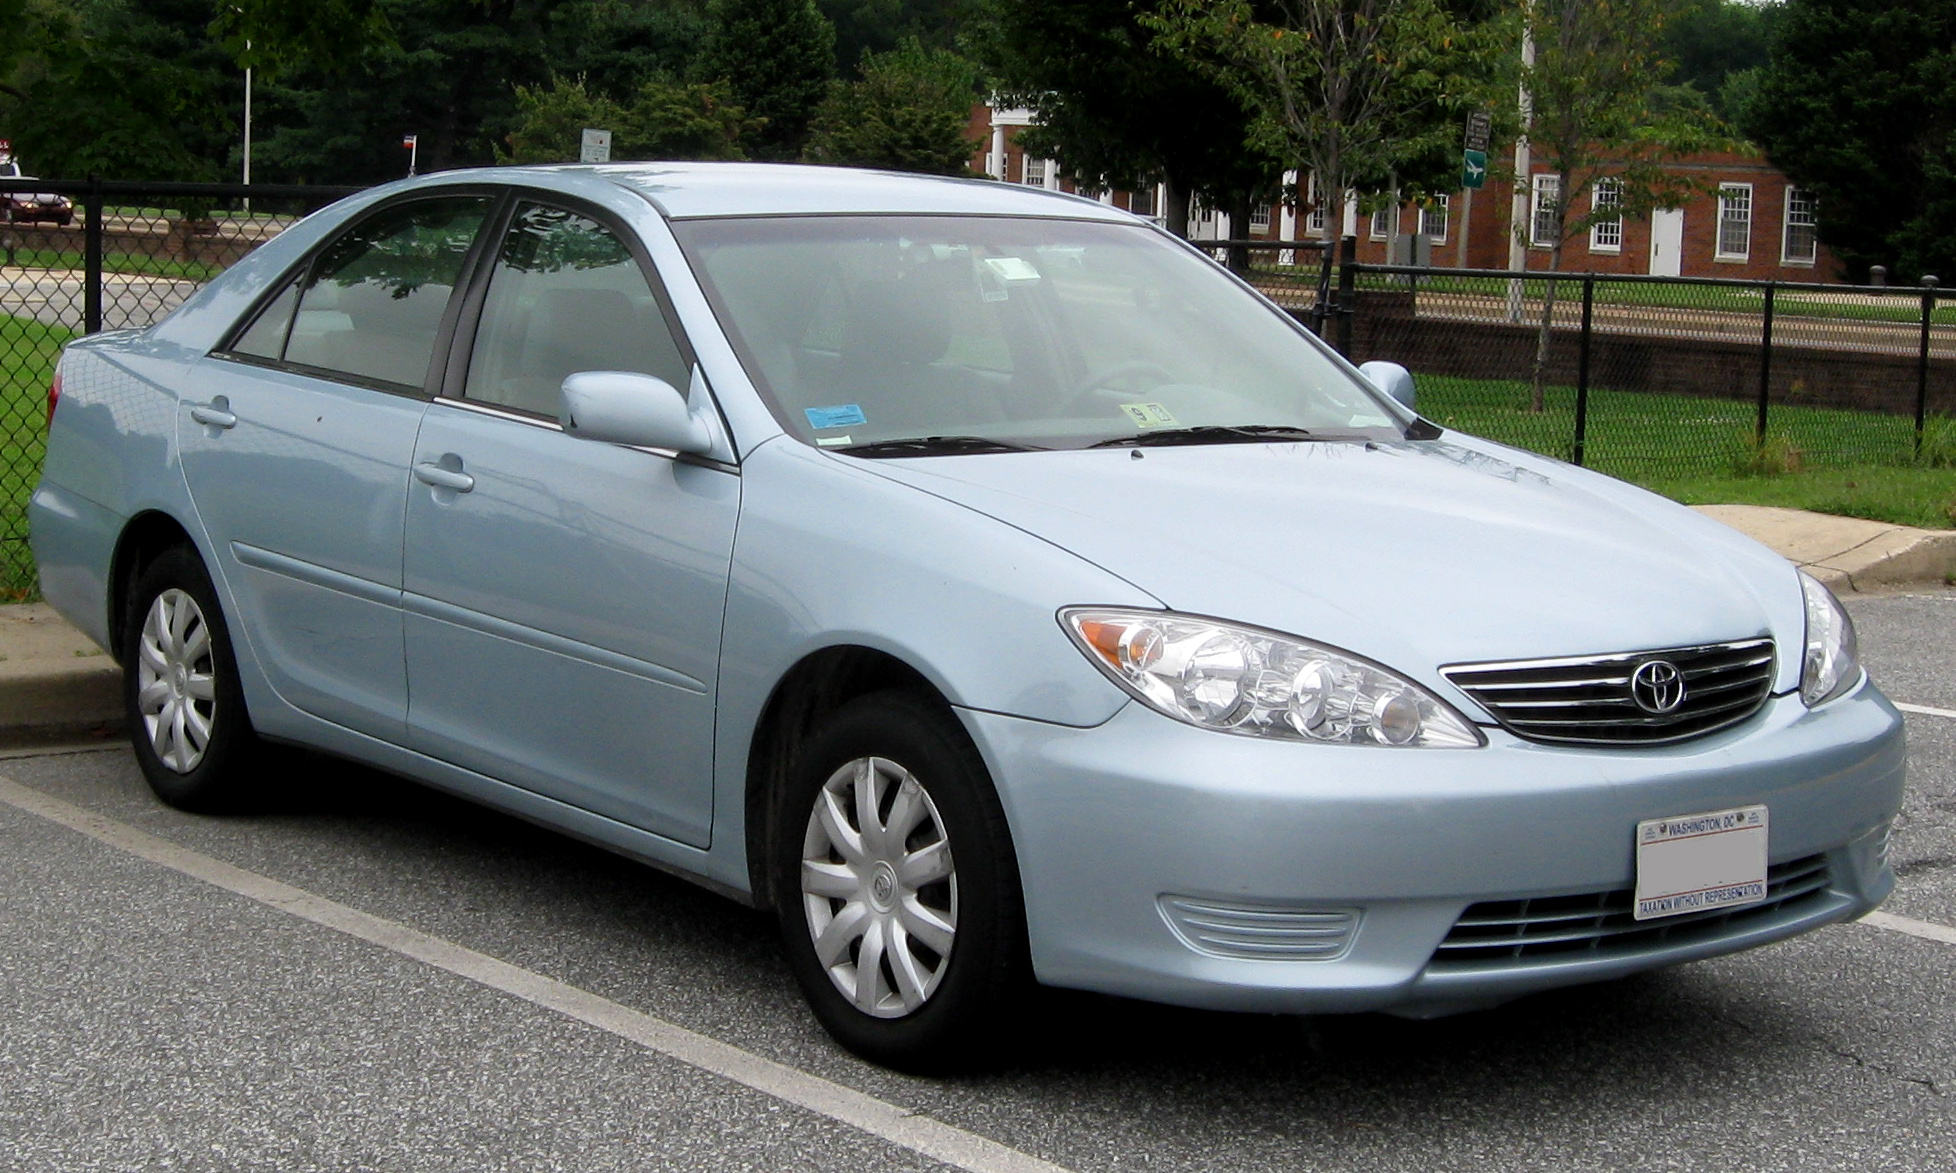 2005 Toyota Camry Information and photos MOMENTcar